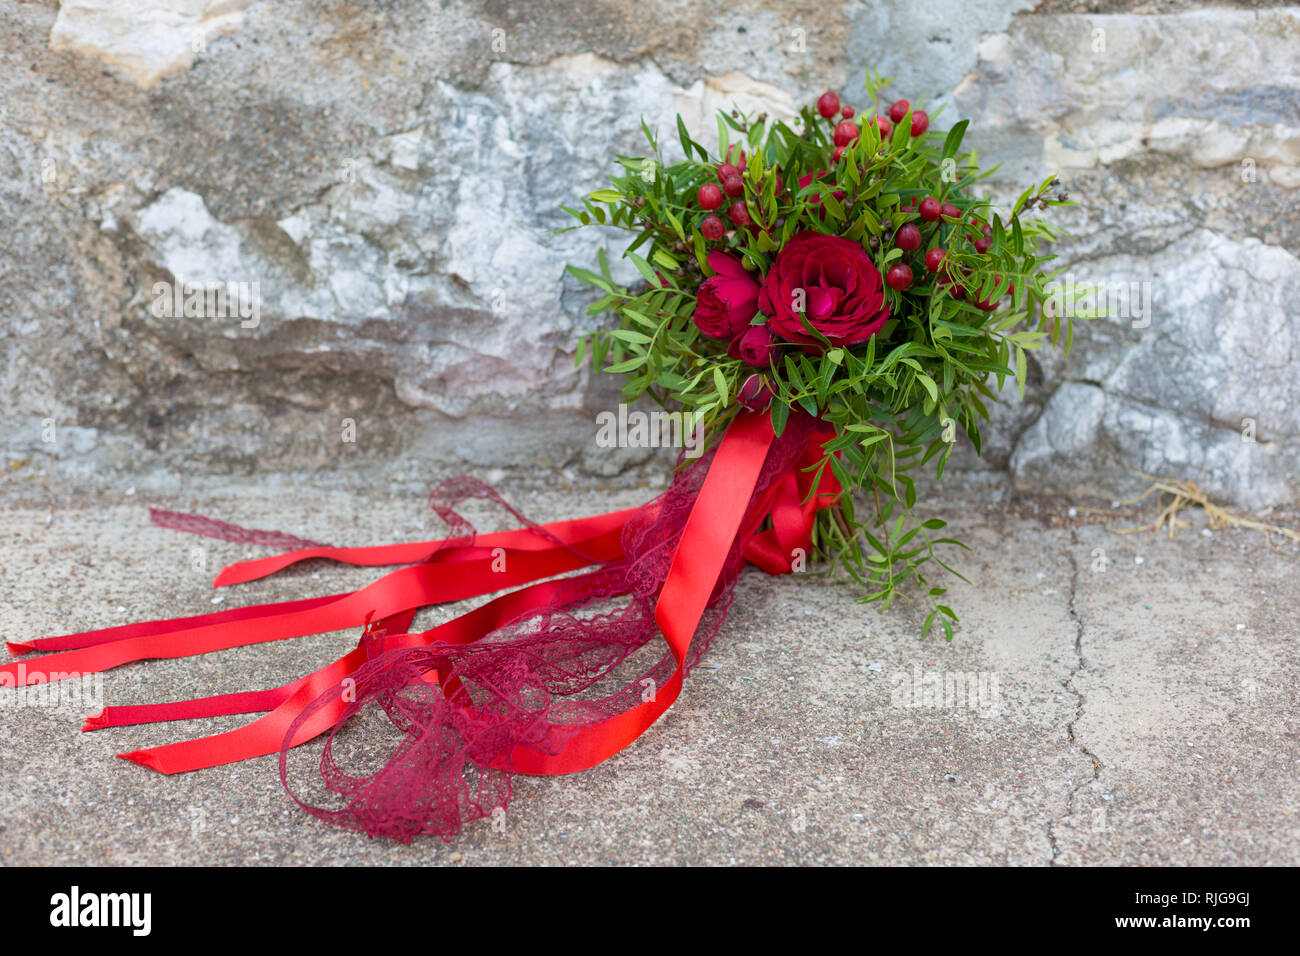 wedding bouquet of red roses, hypericum and pistache Stock Photo